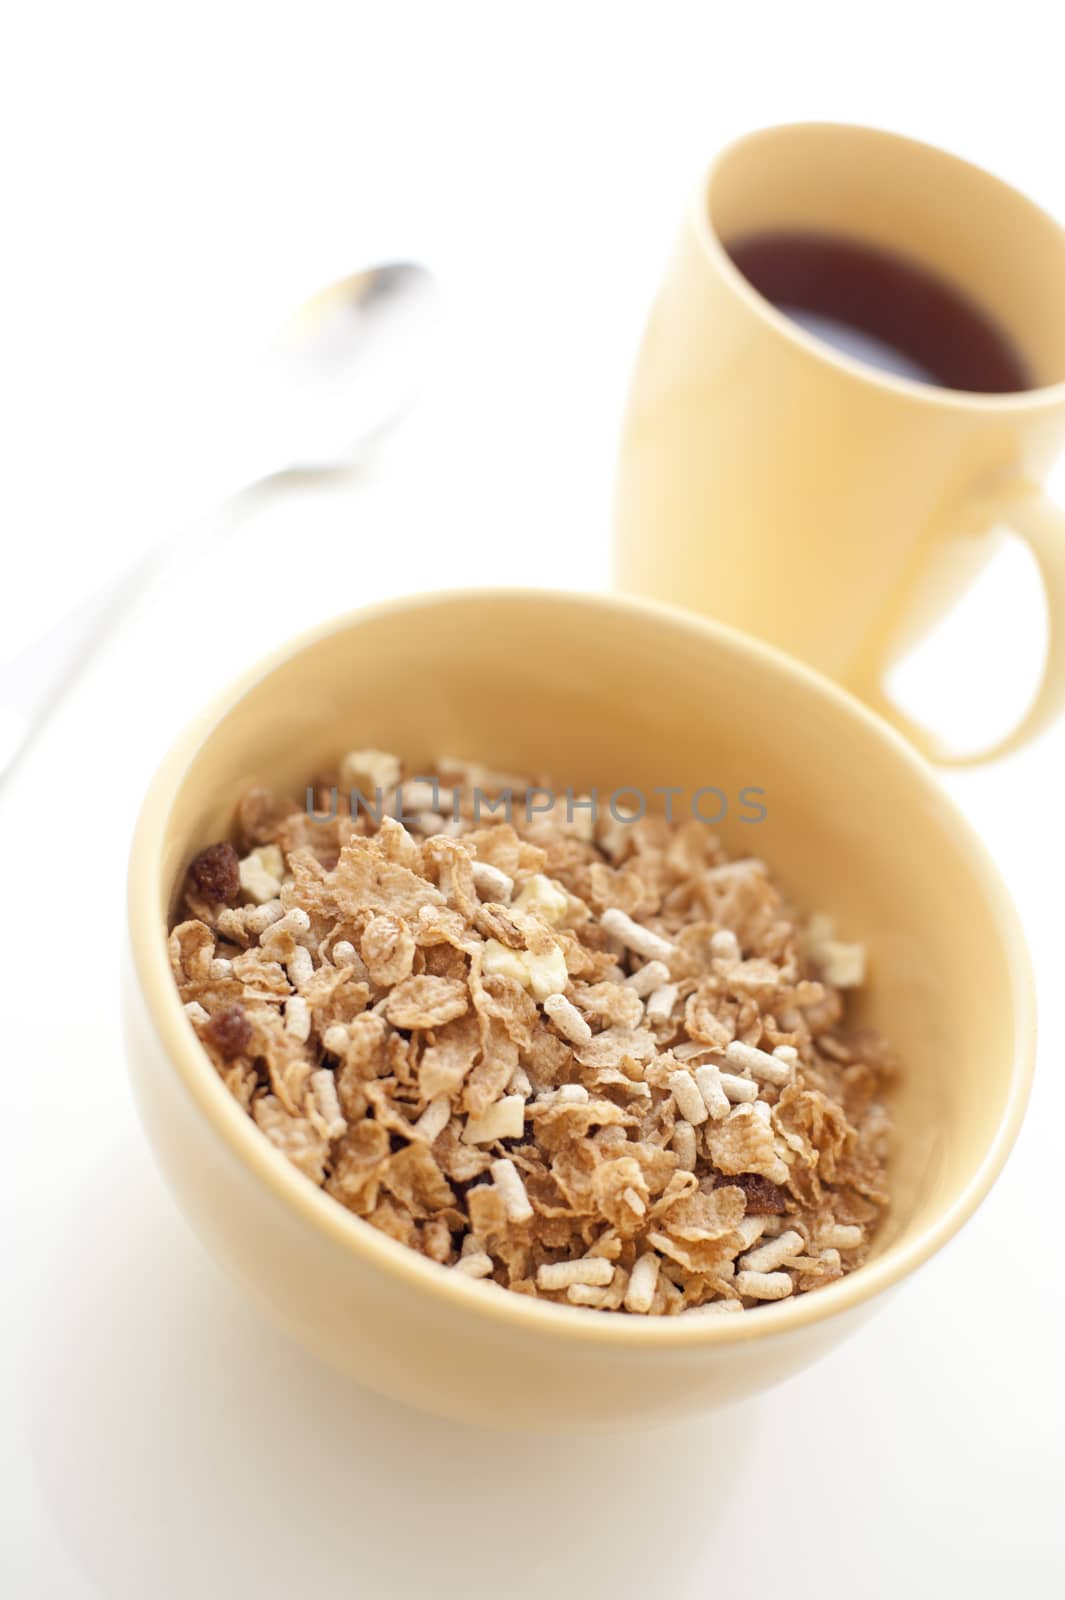 Breakfast cereal and coffee by stockarch